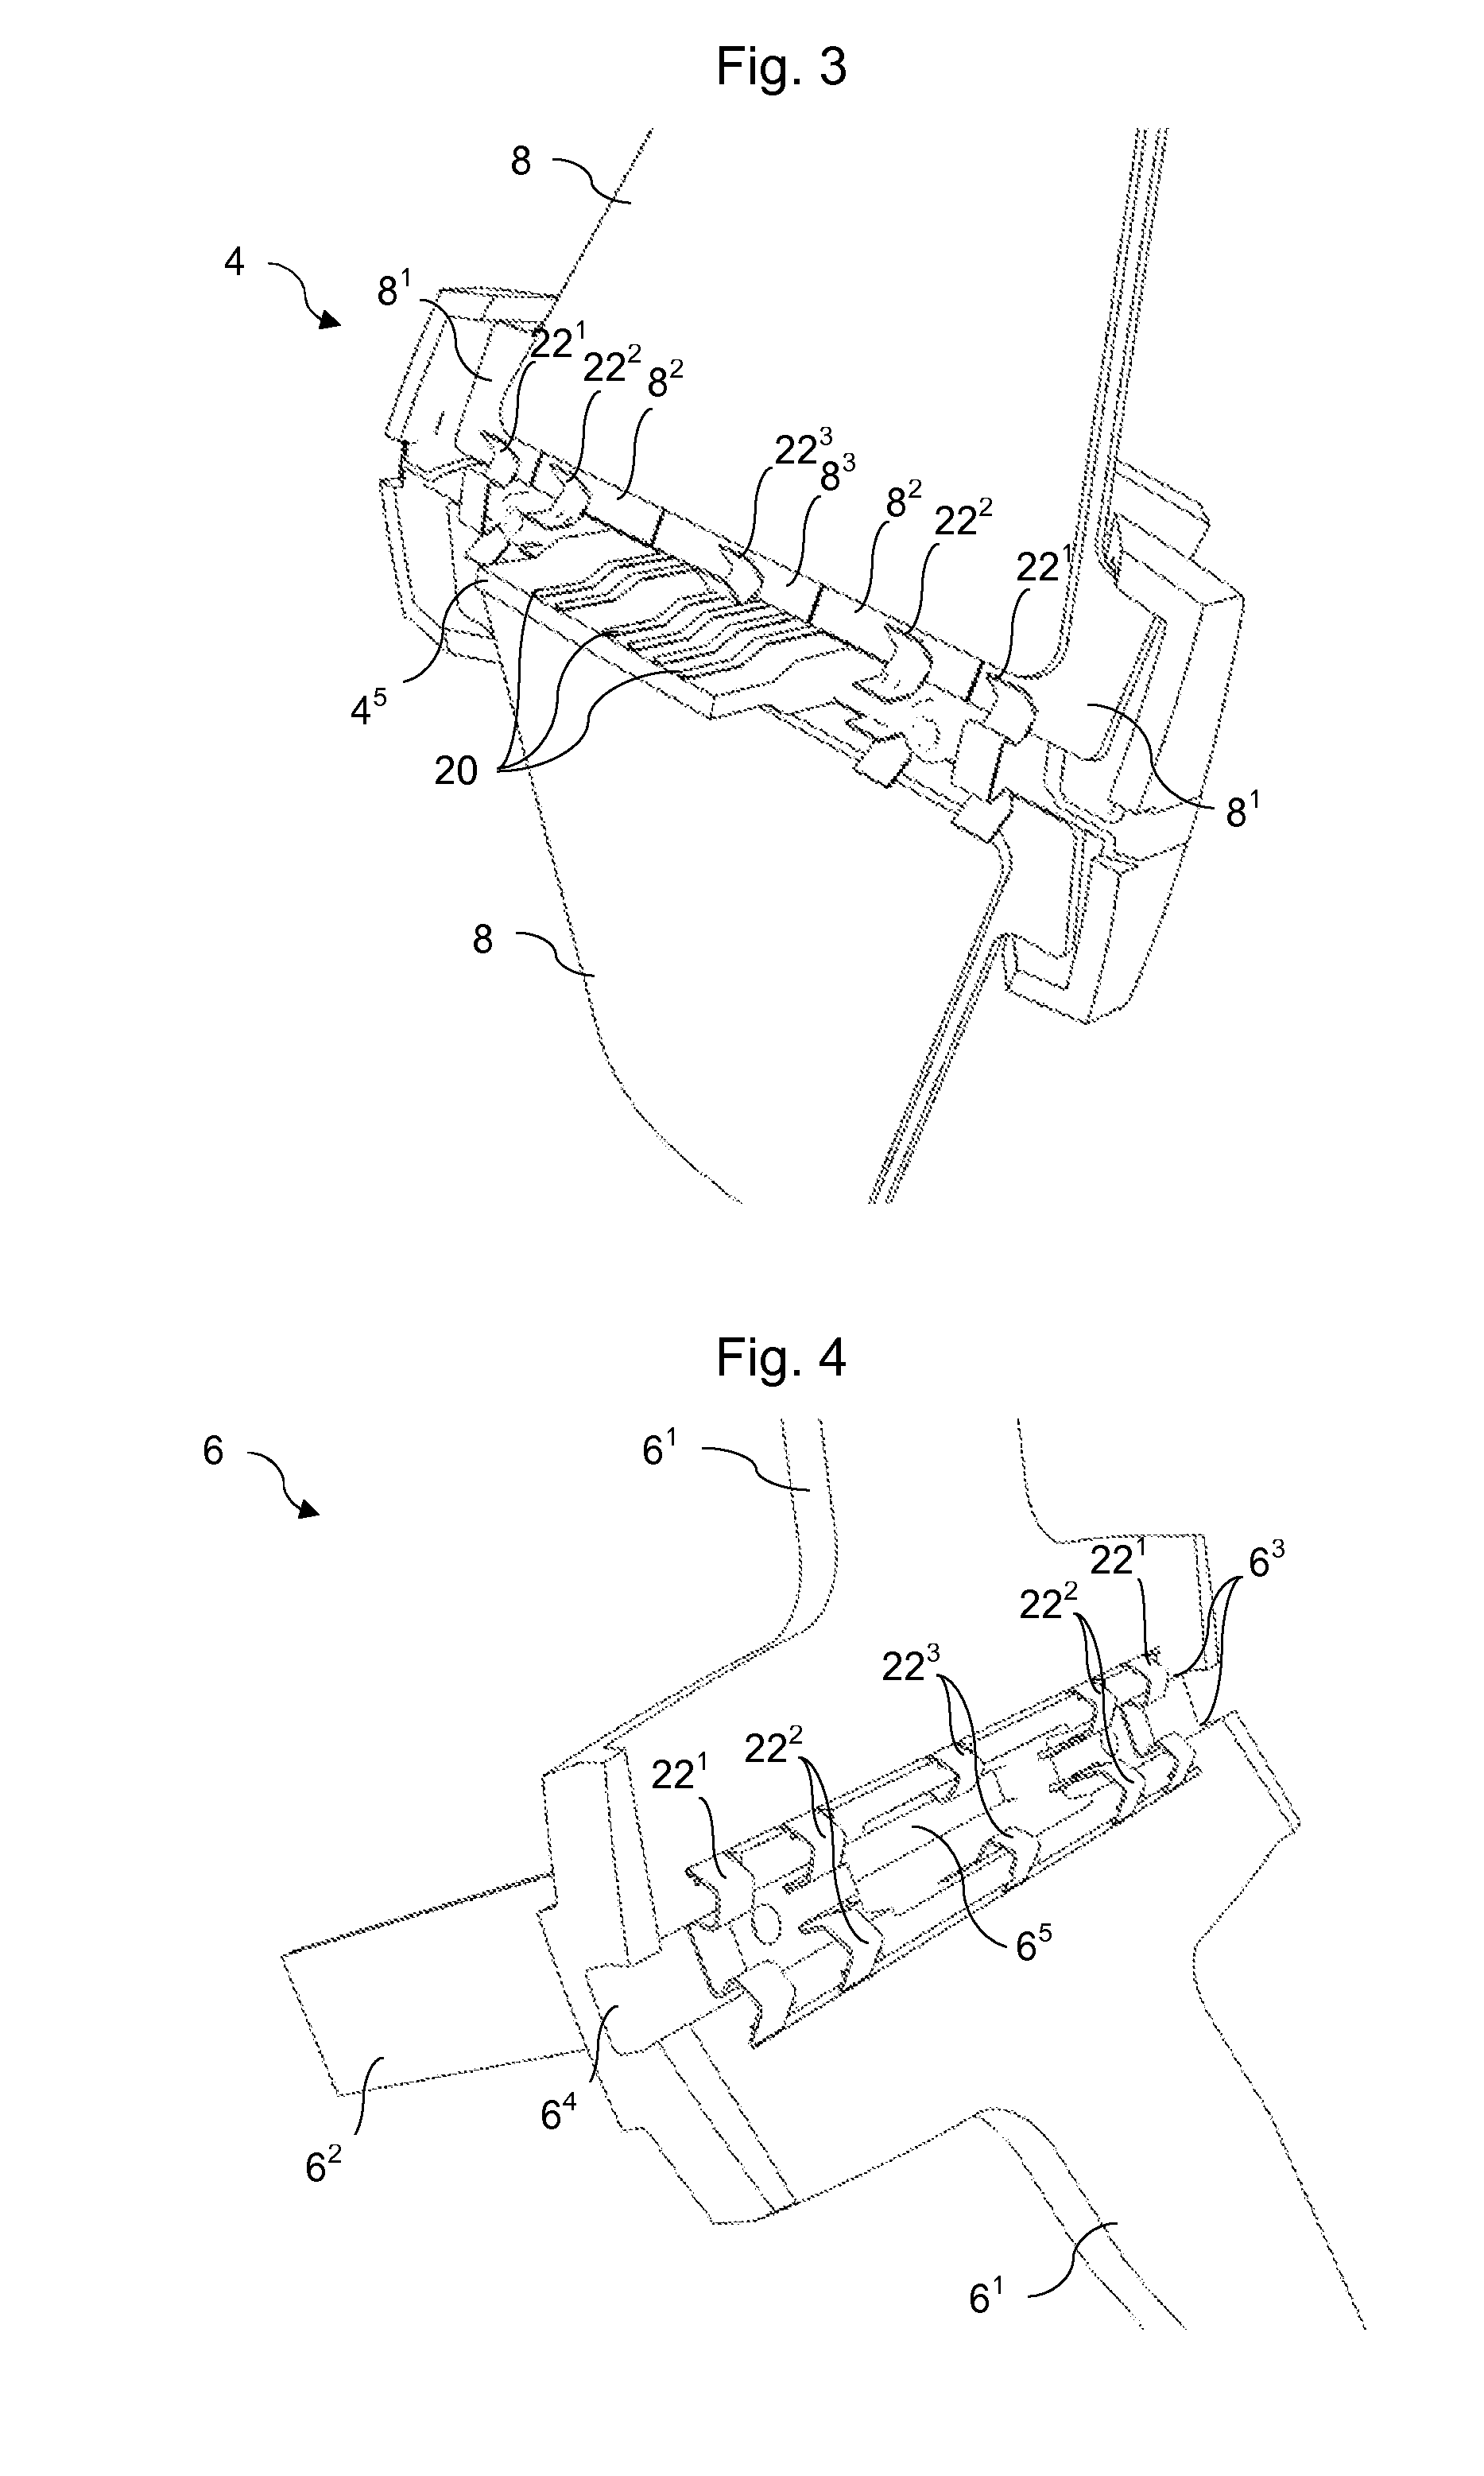 OLED diode support with elastic connection blades